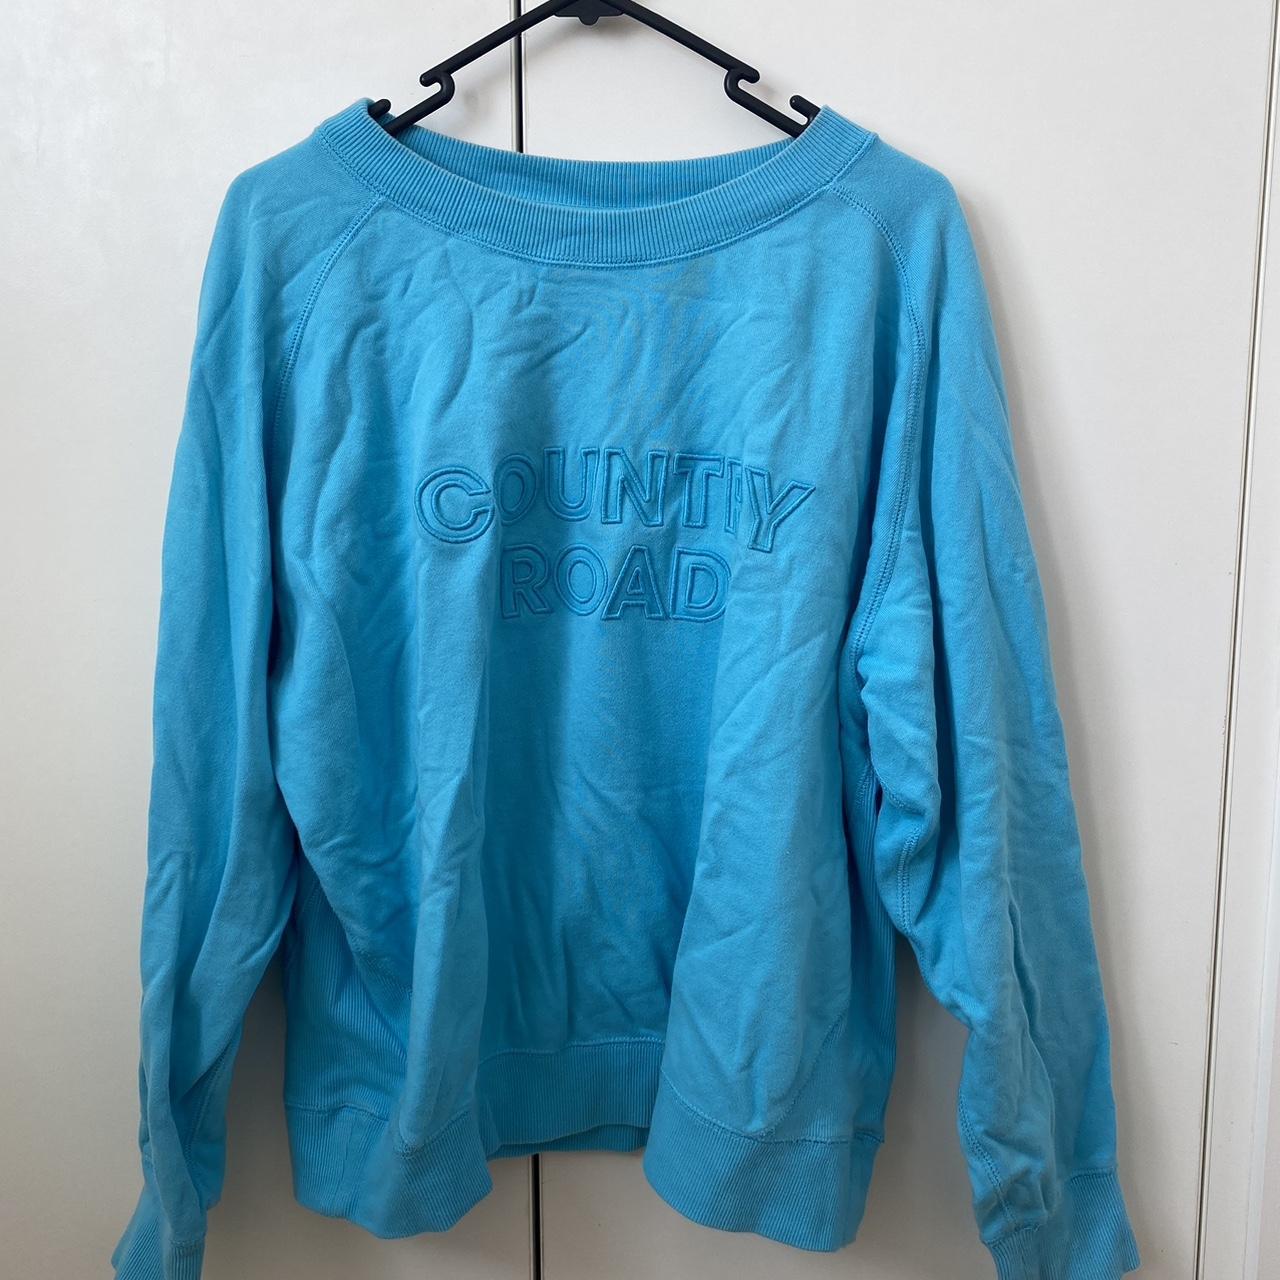 Country road jumper blue Worn in good condition... - Depop